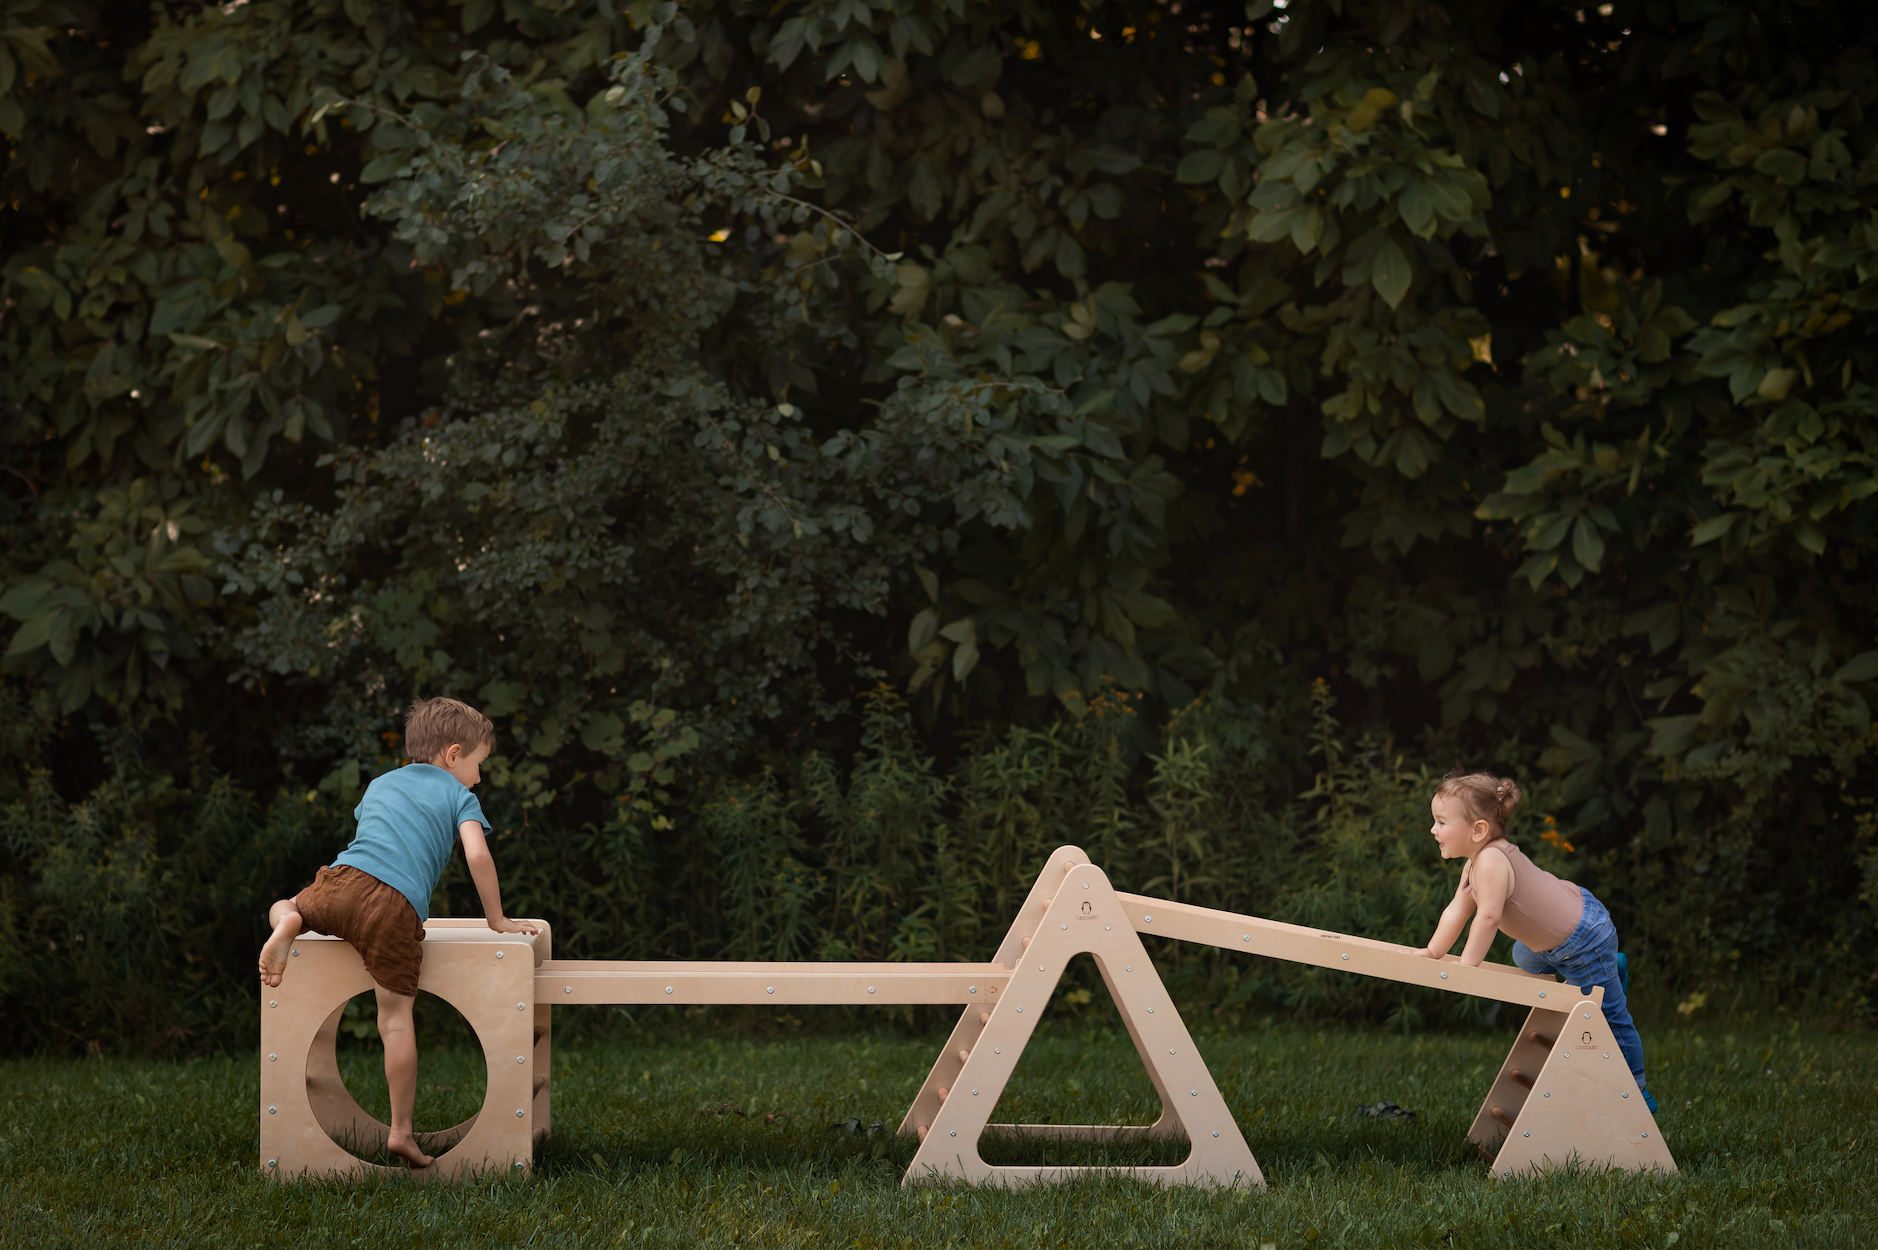 The Best Wooden Playset for Hours of Fun.